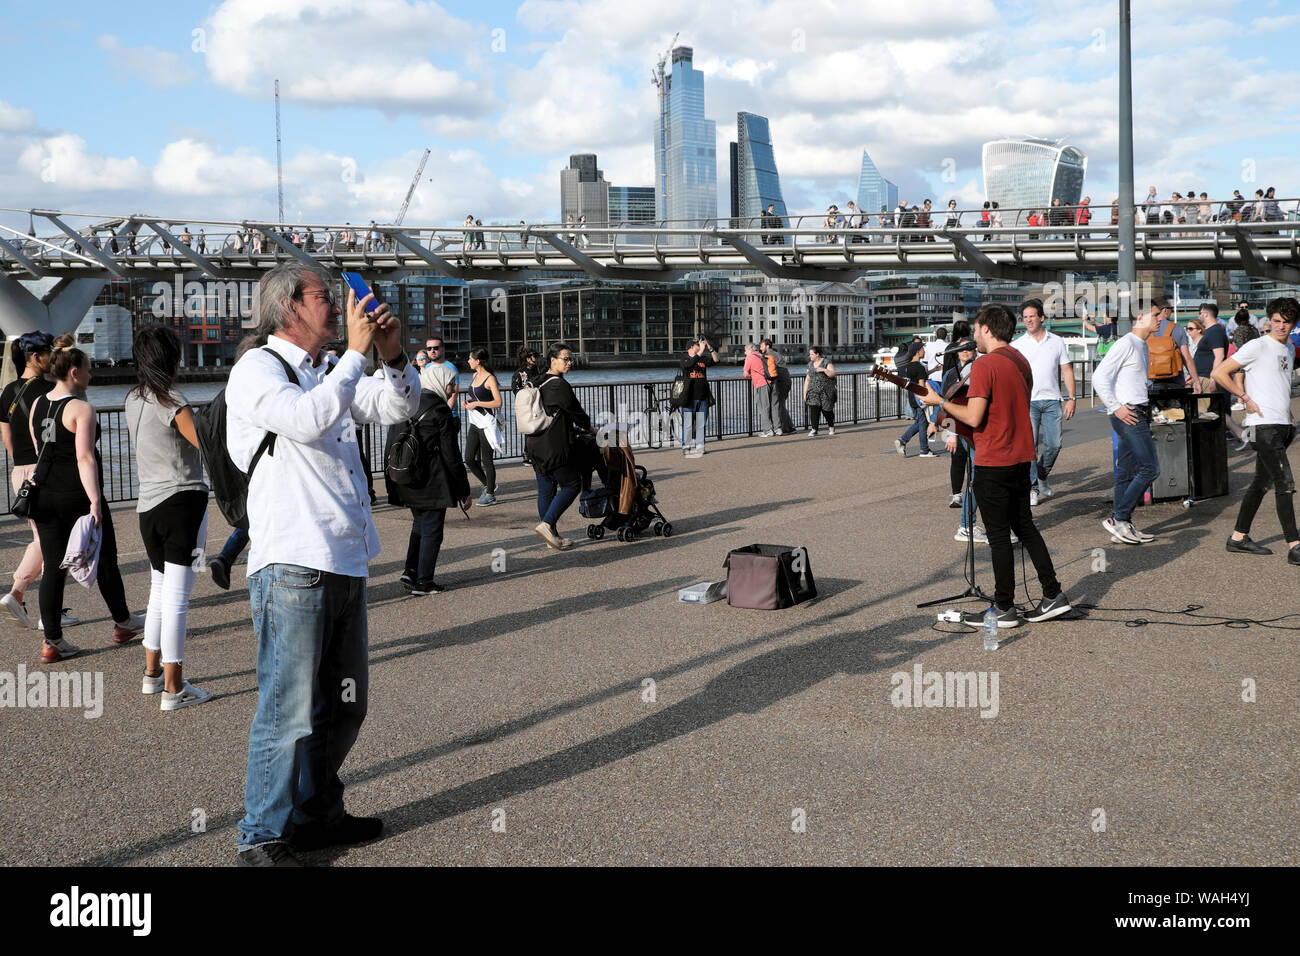 Busker busking & tourist  tourists in the street outside the Tate Modern Art Gallery Bankside by River Thames South London England UK  KATHY DEWITT Stock Photo